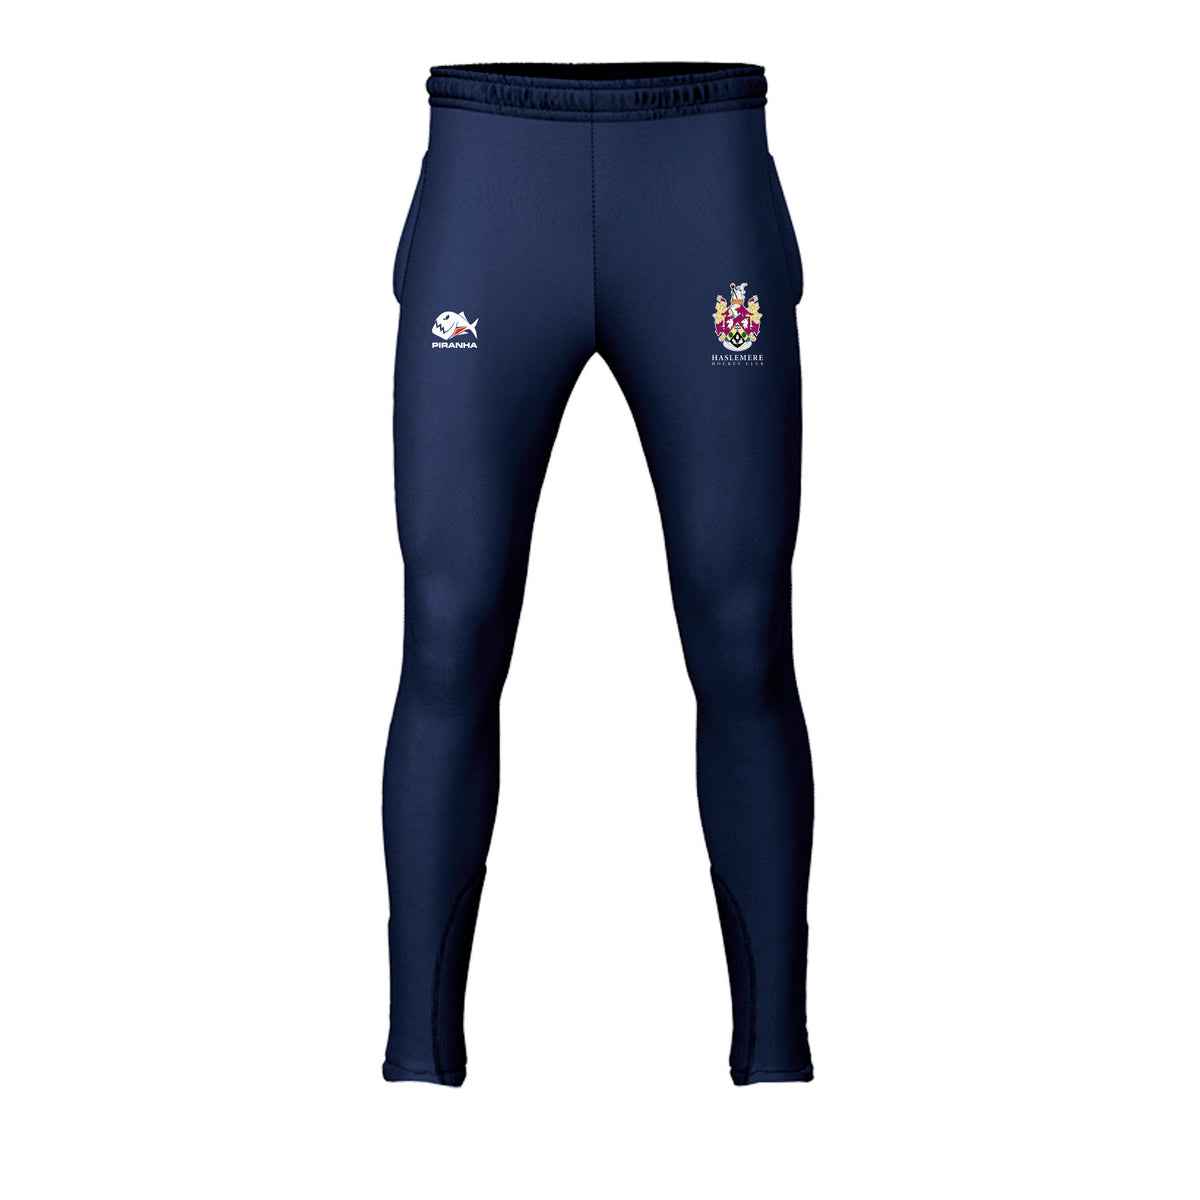 Haslemere HC Skinny Pants